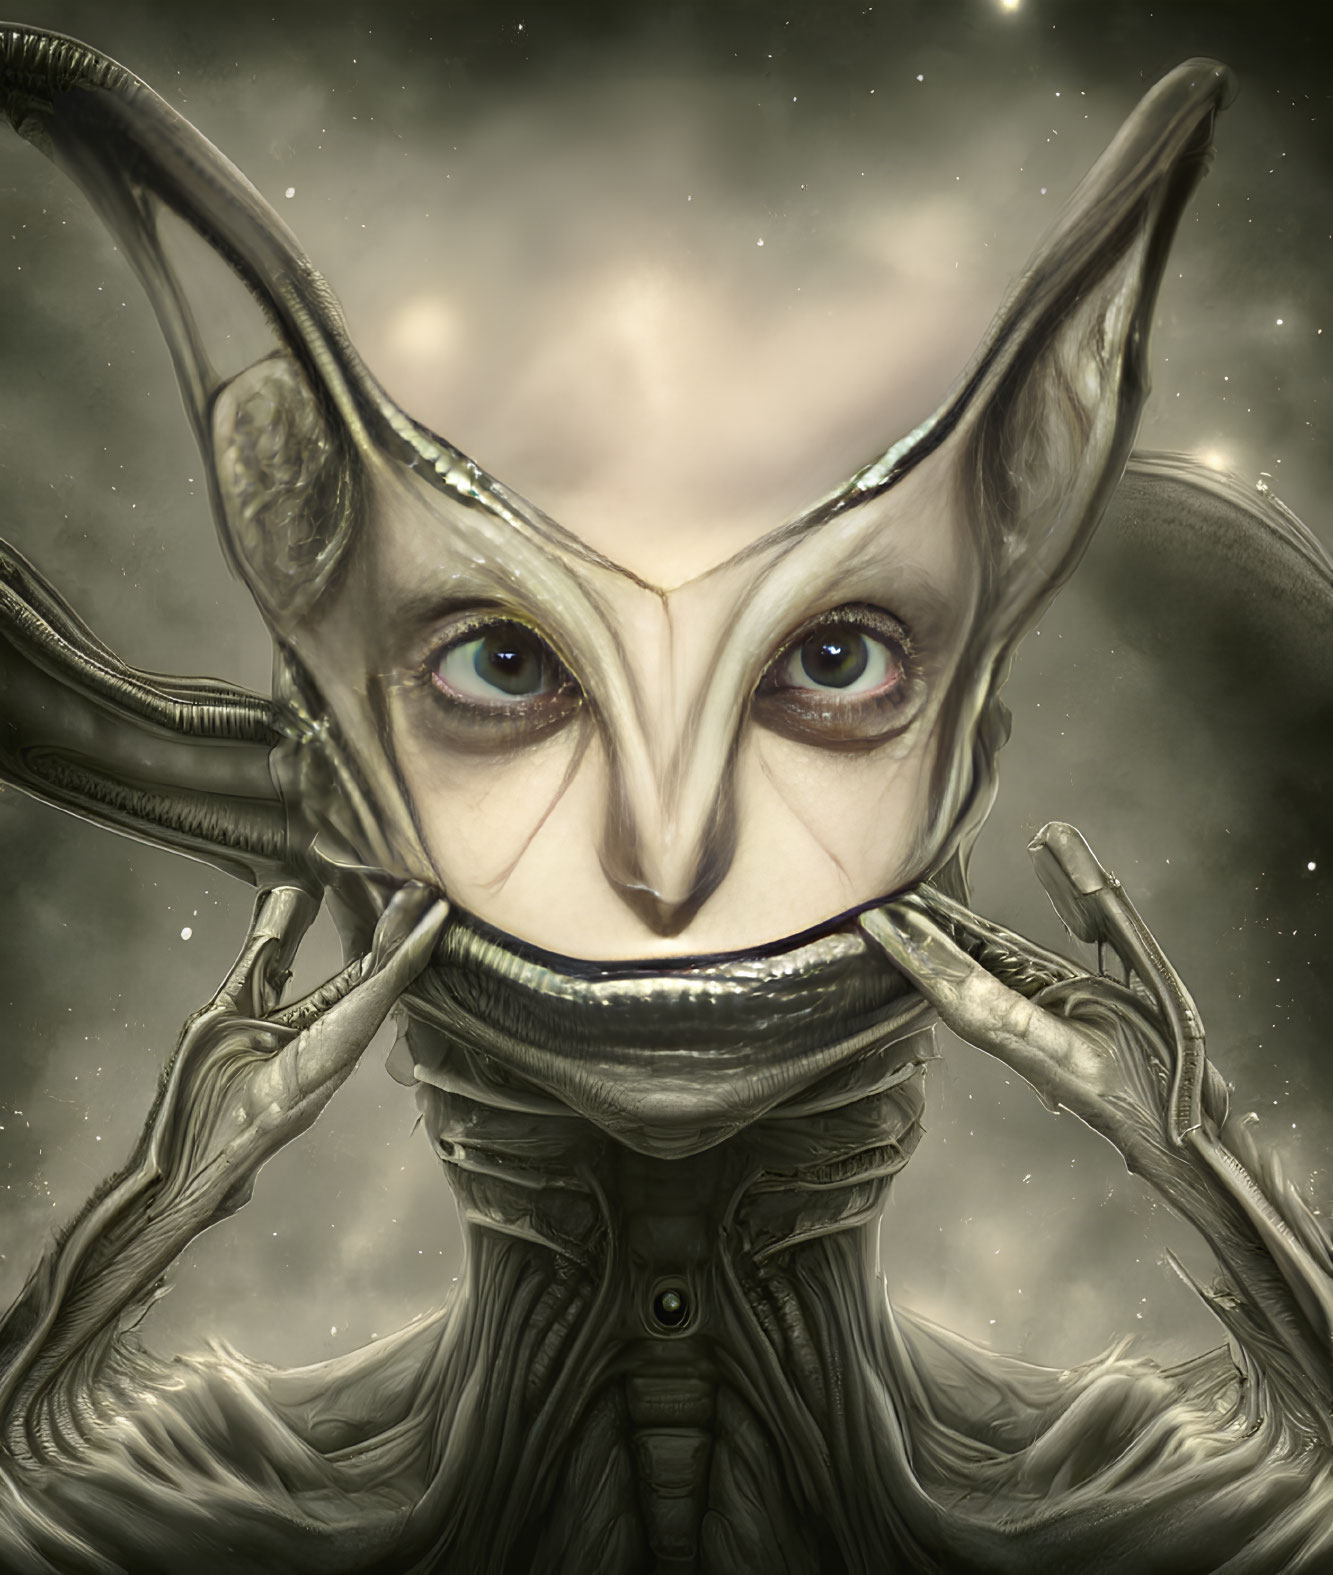 Alien with large, pointed ears and human-like eyes on starry backdrop